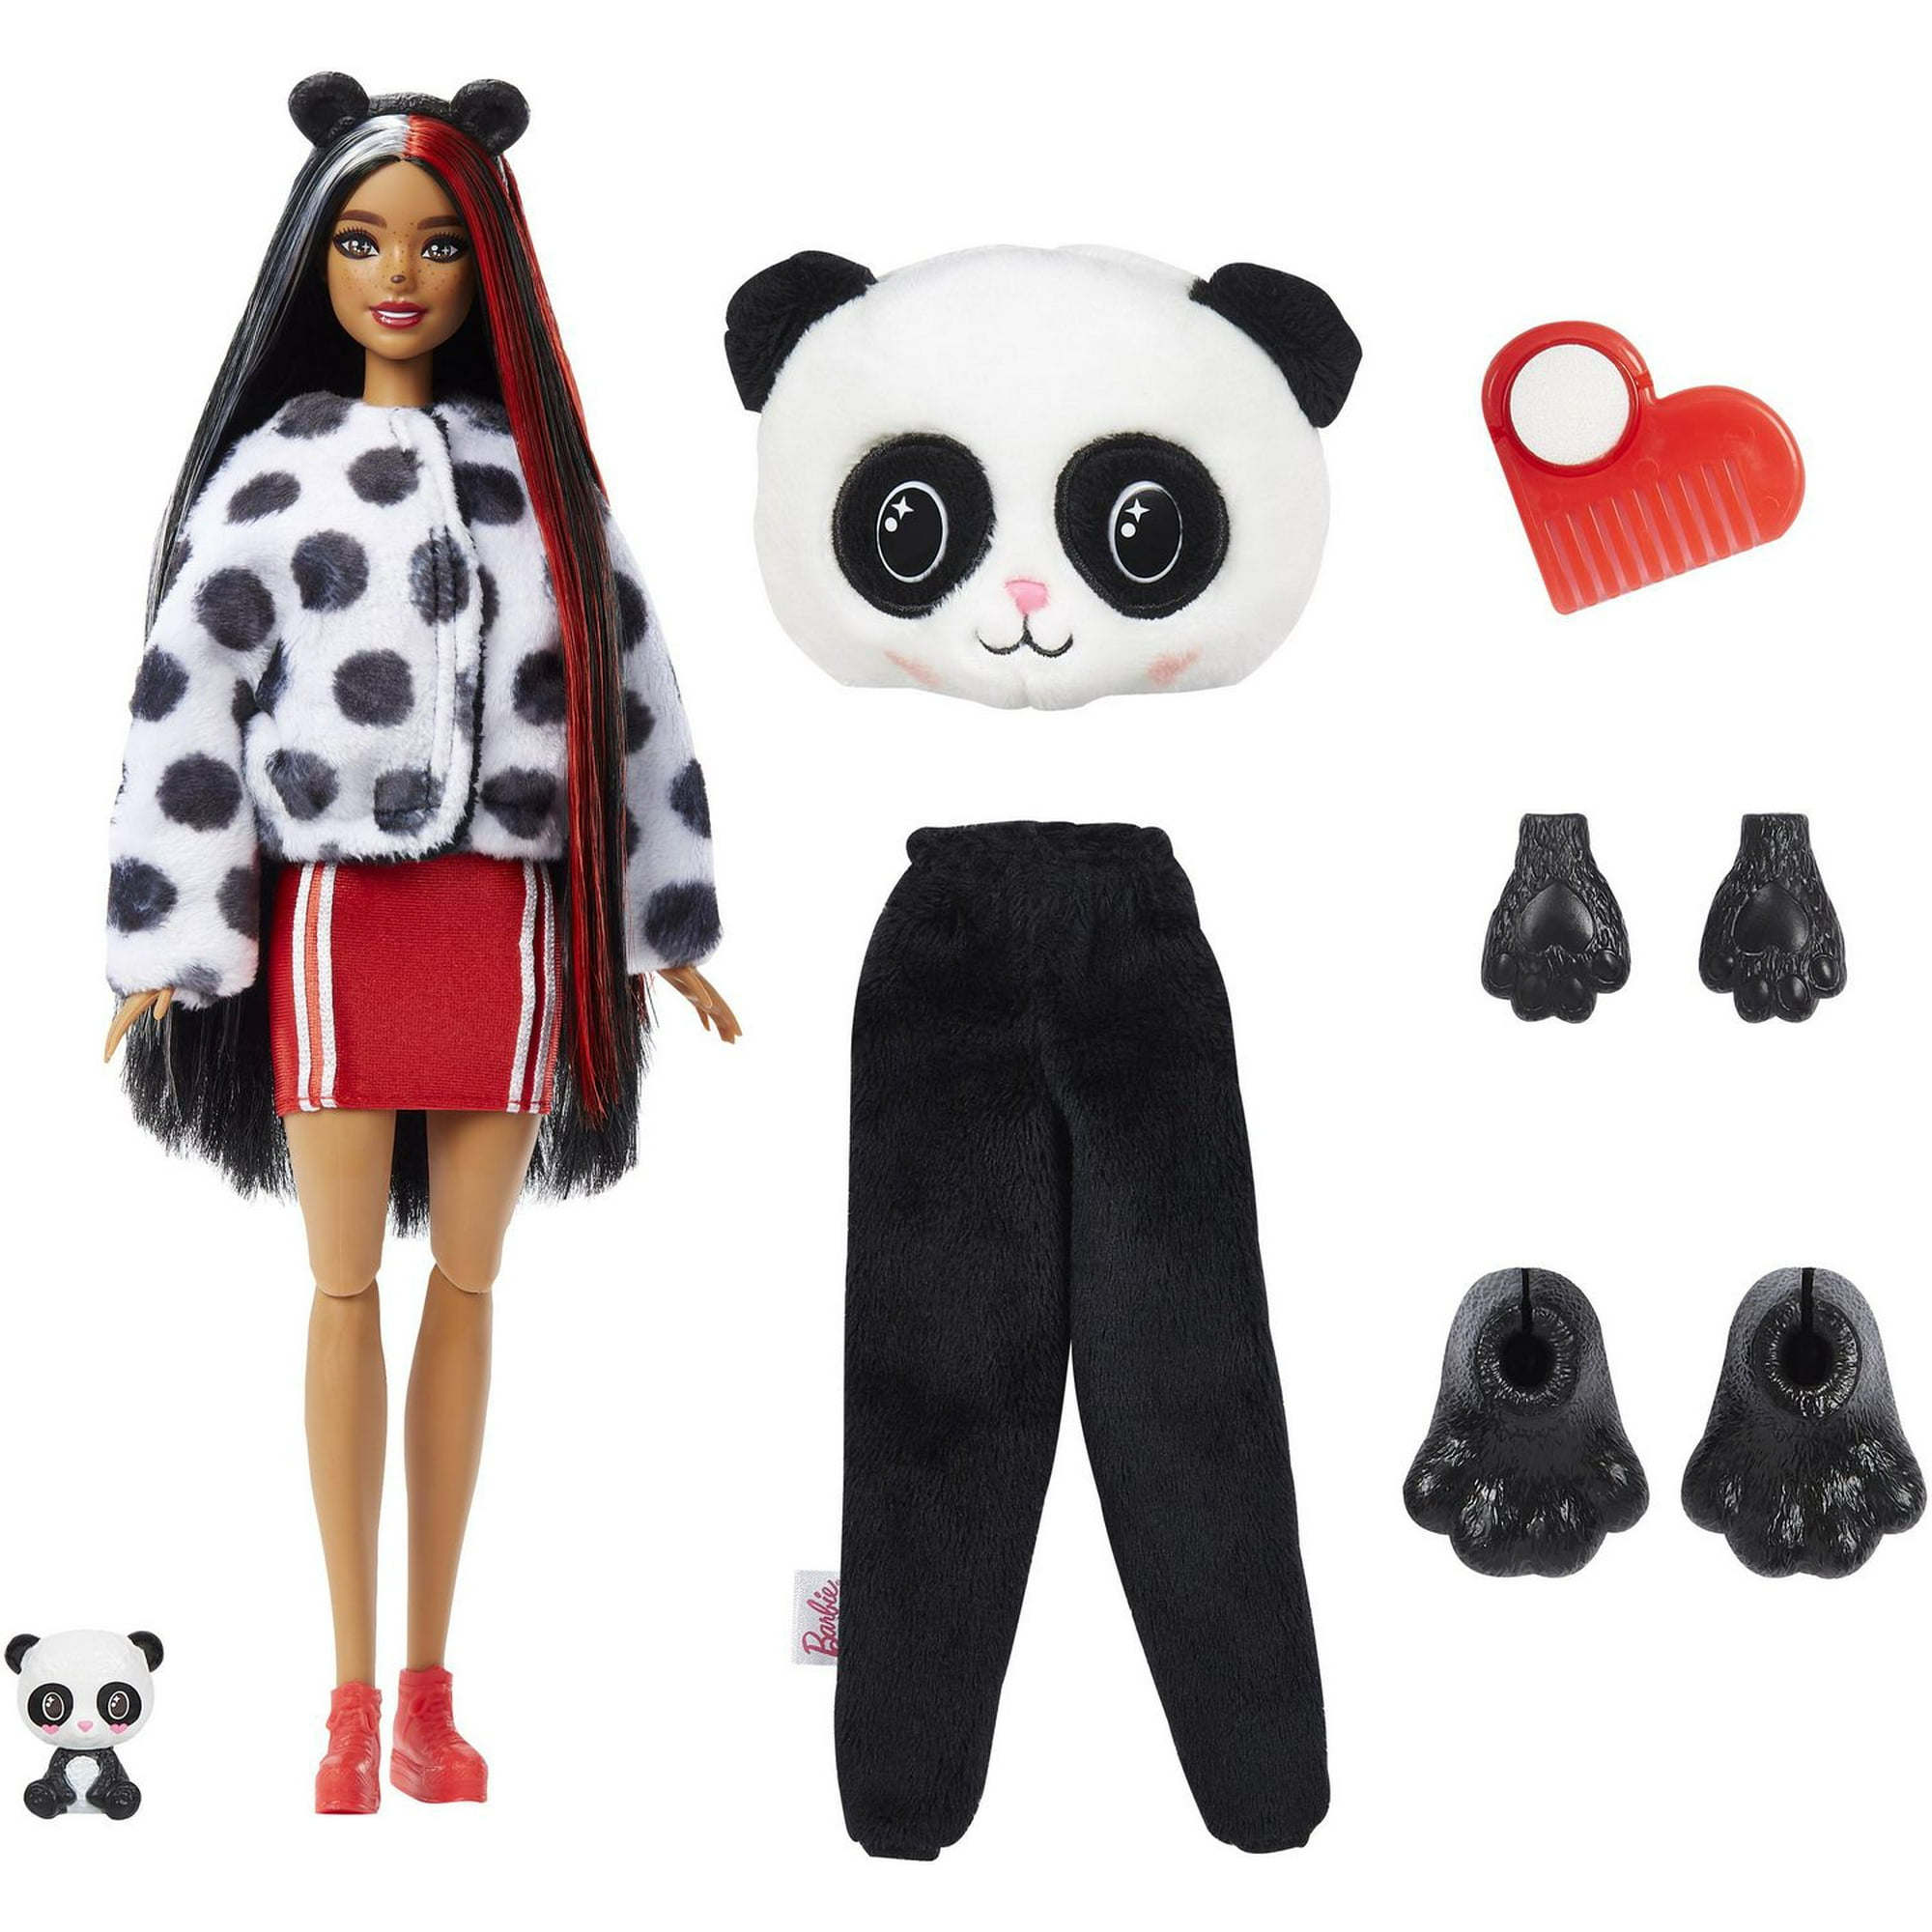 Barbie Cutie Reveal Doll with Puppy Plush Costume & 10 Surprises Including  Mini Pet & Color Change, Gift for Kids 3 Years & Older 